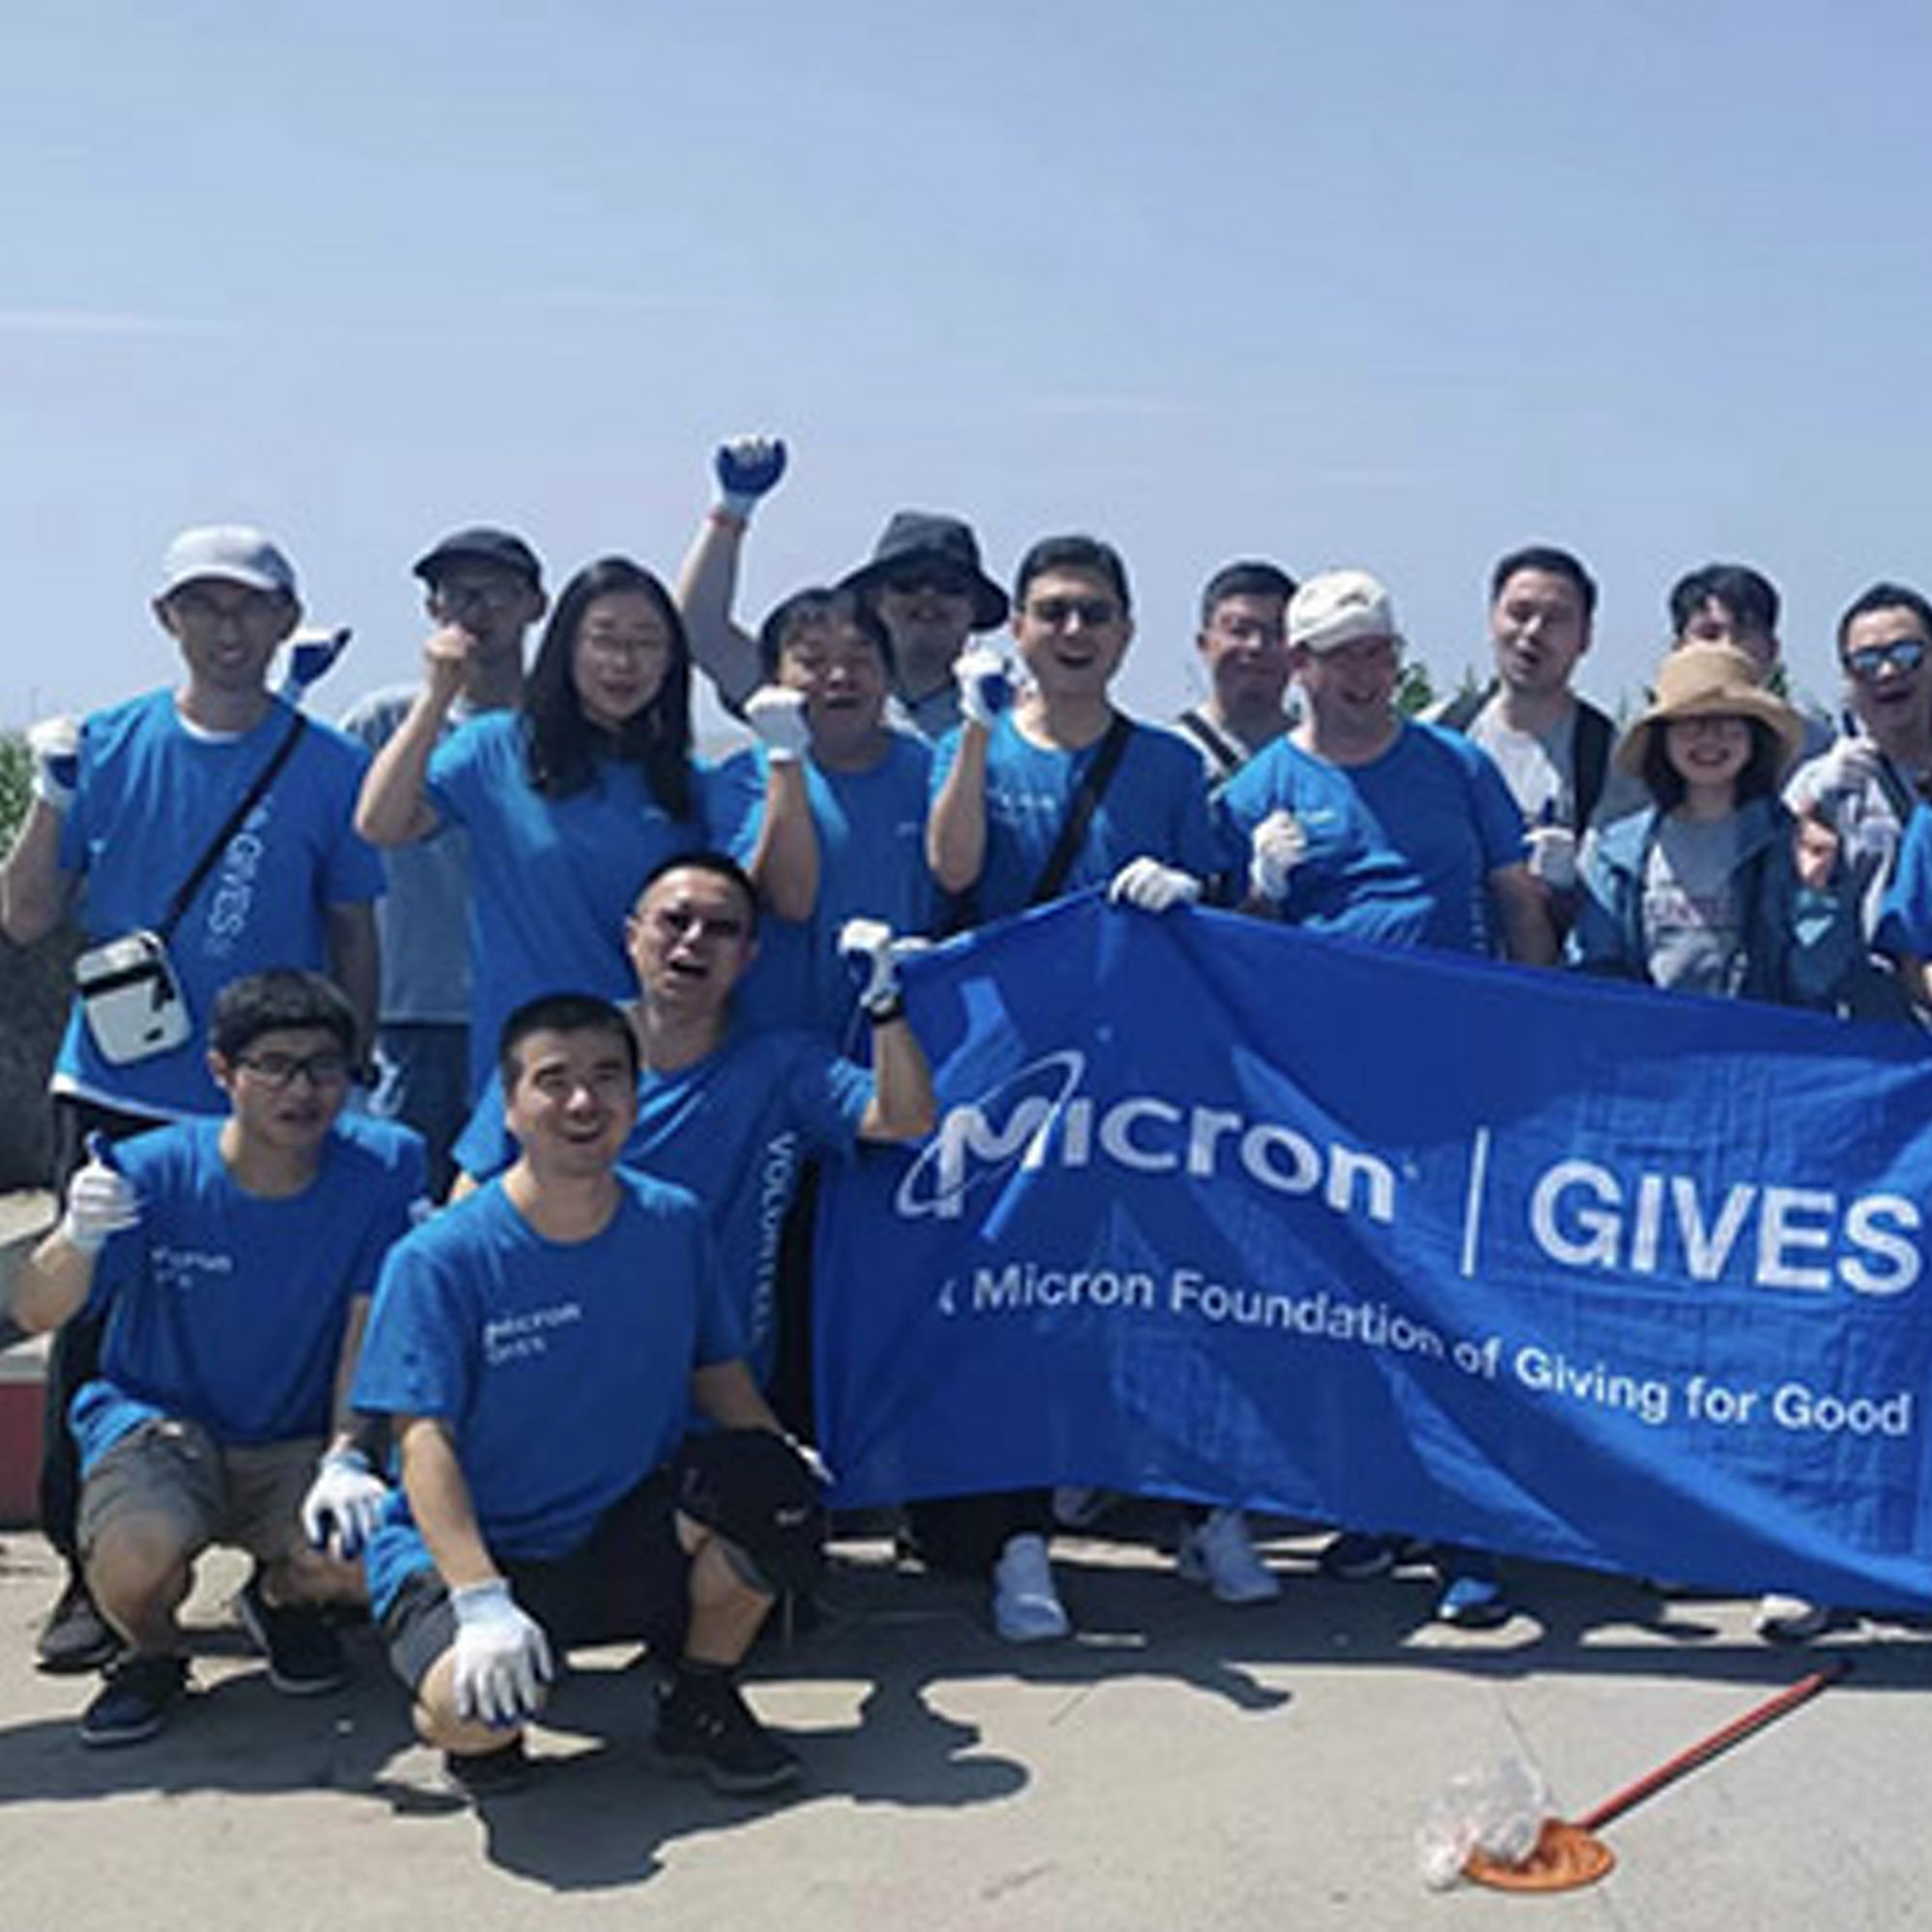 Micron Gives team